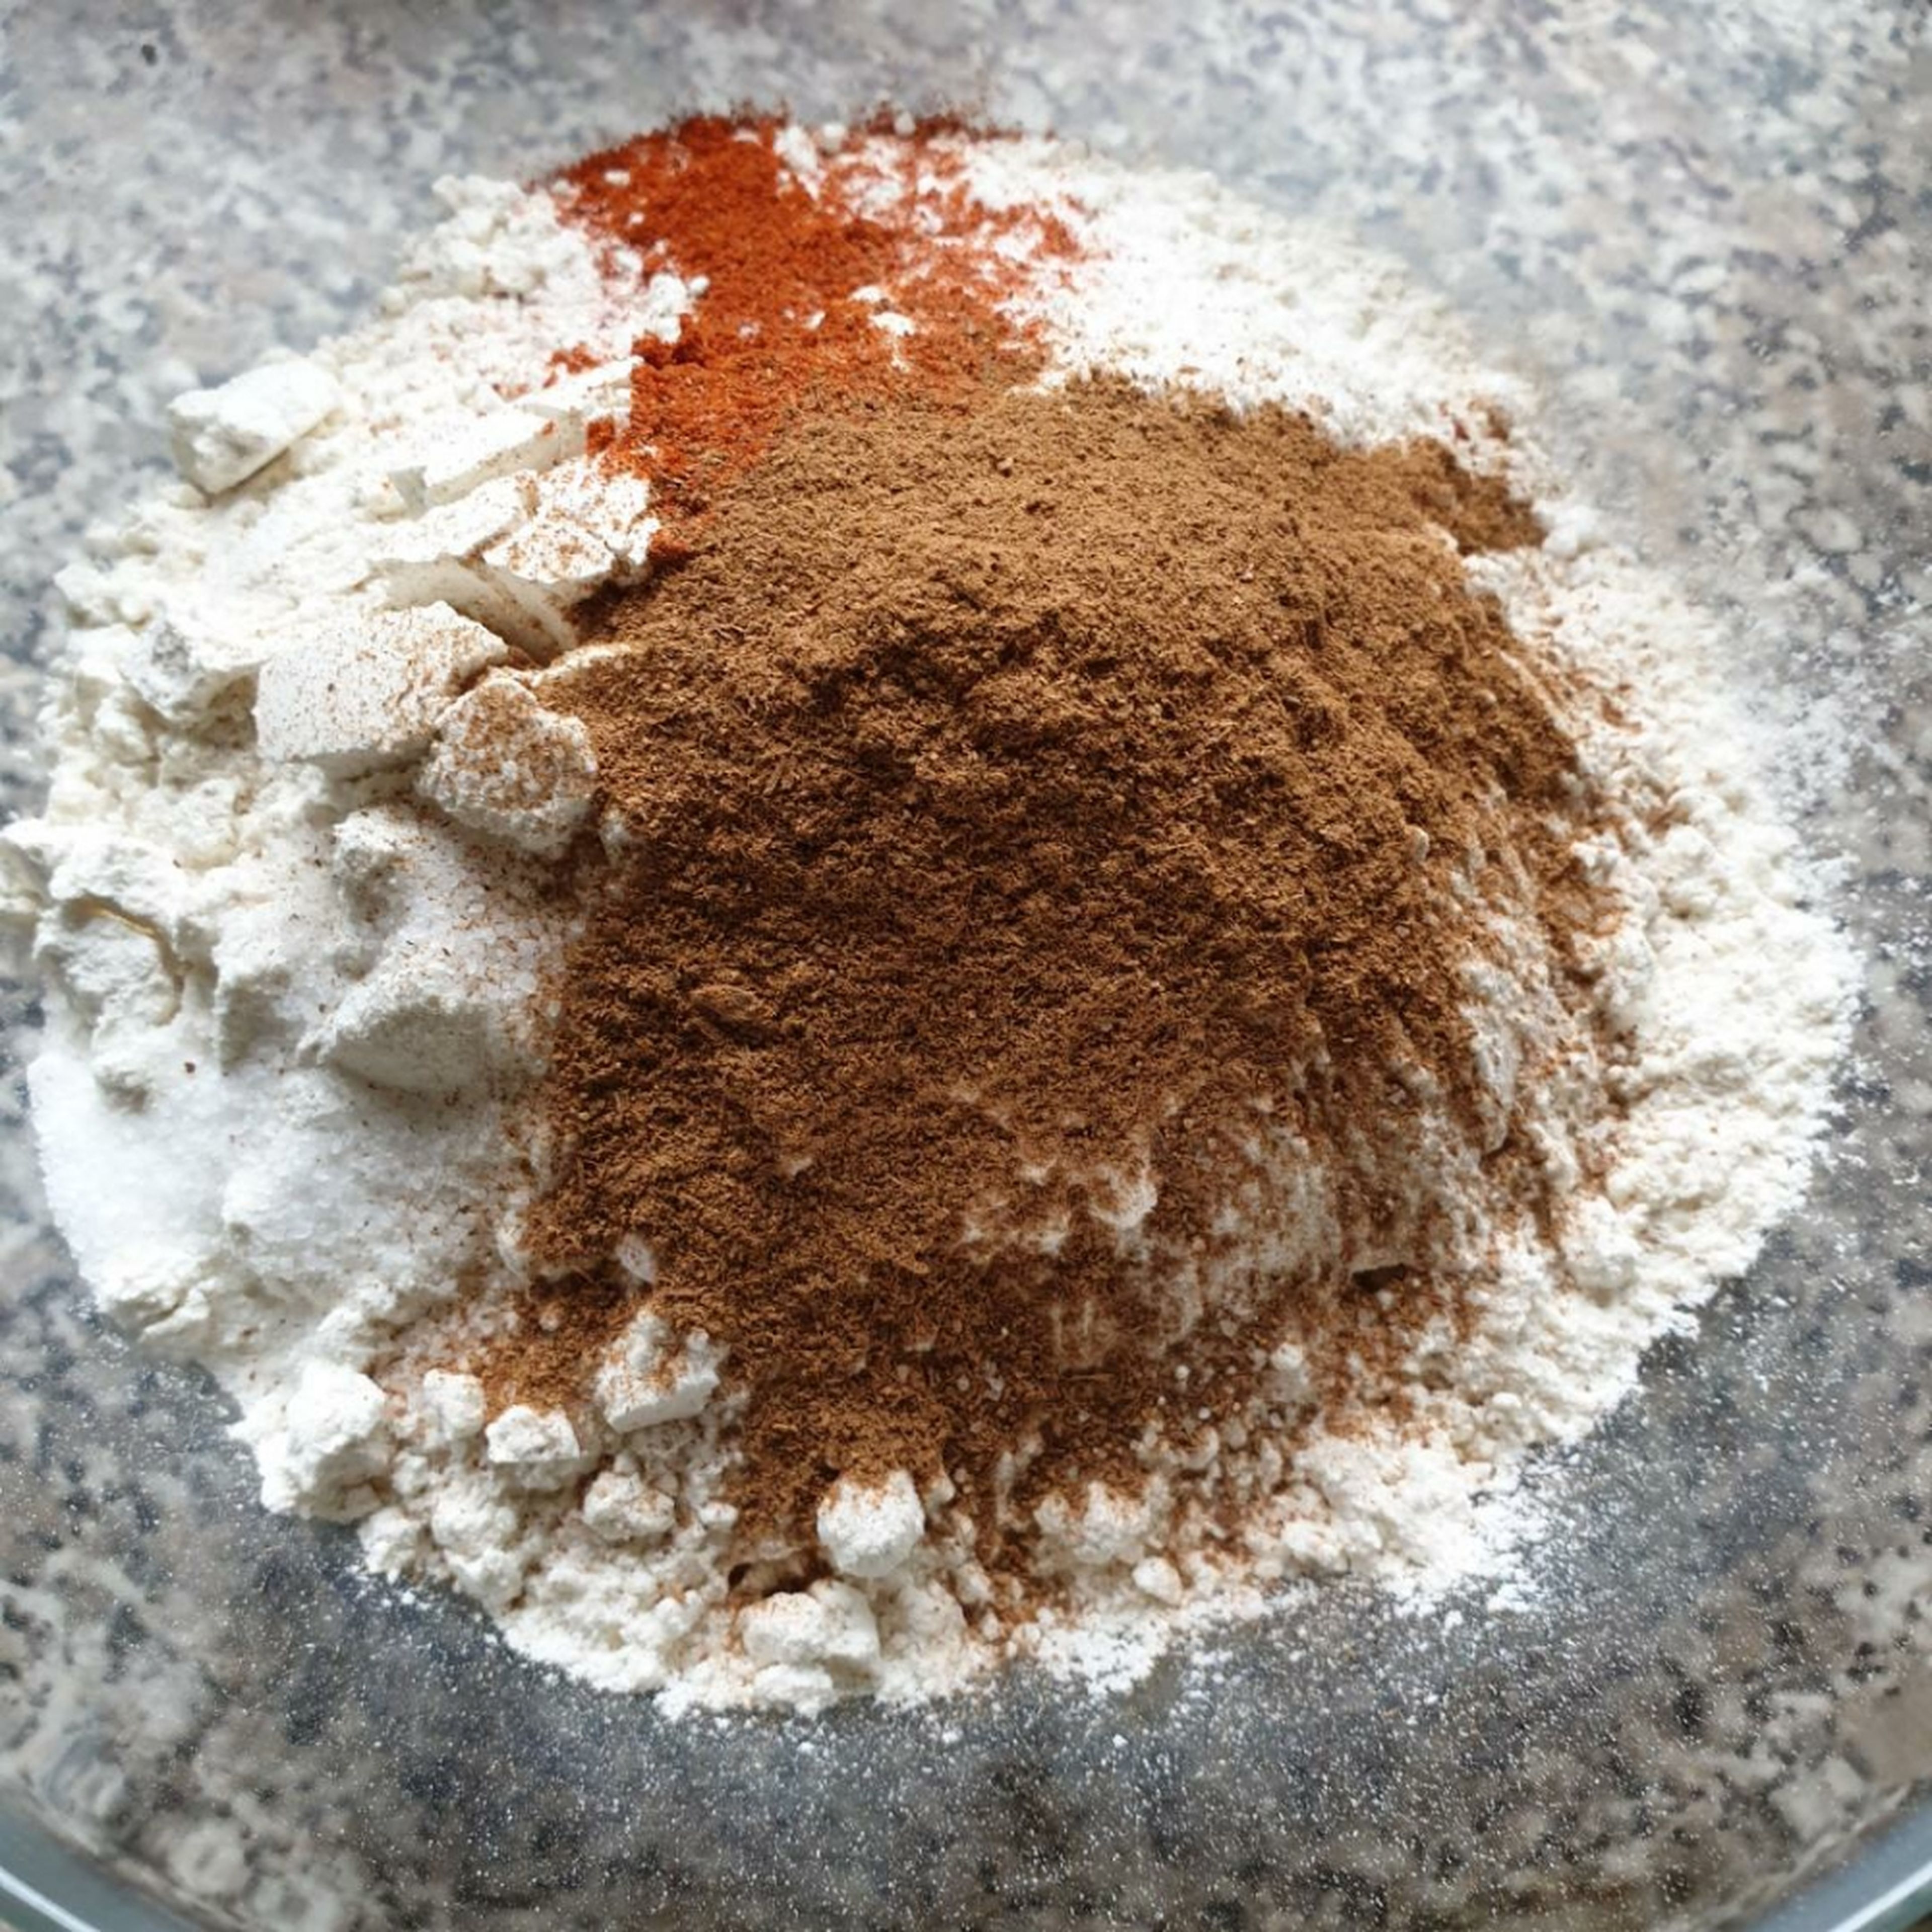 Sift the flour in a bowl and combine cayenne pepper, ground cinnamon, salt and baking soda and set aside.